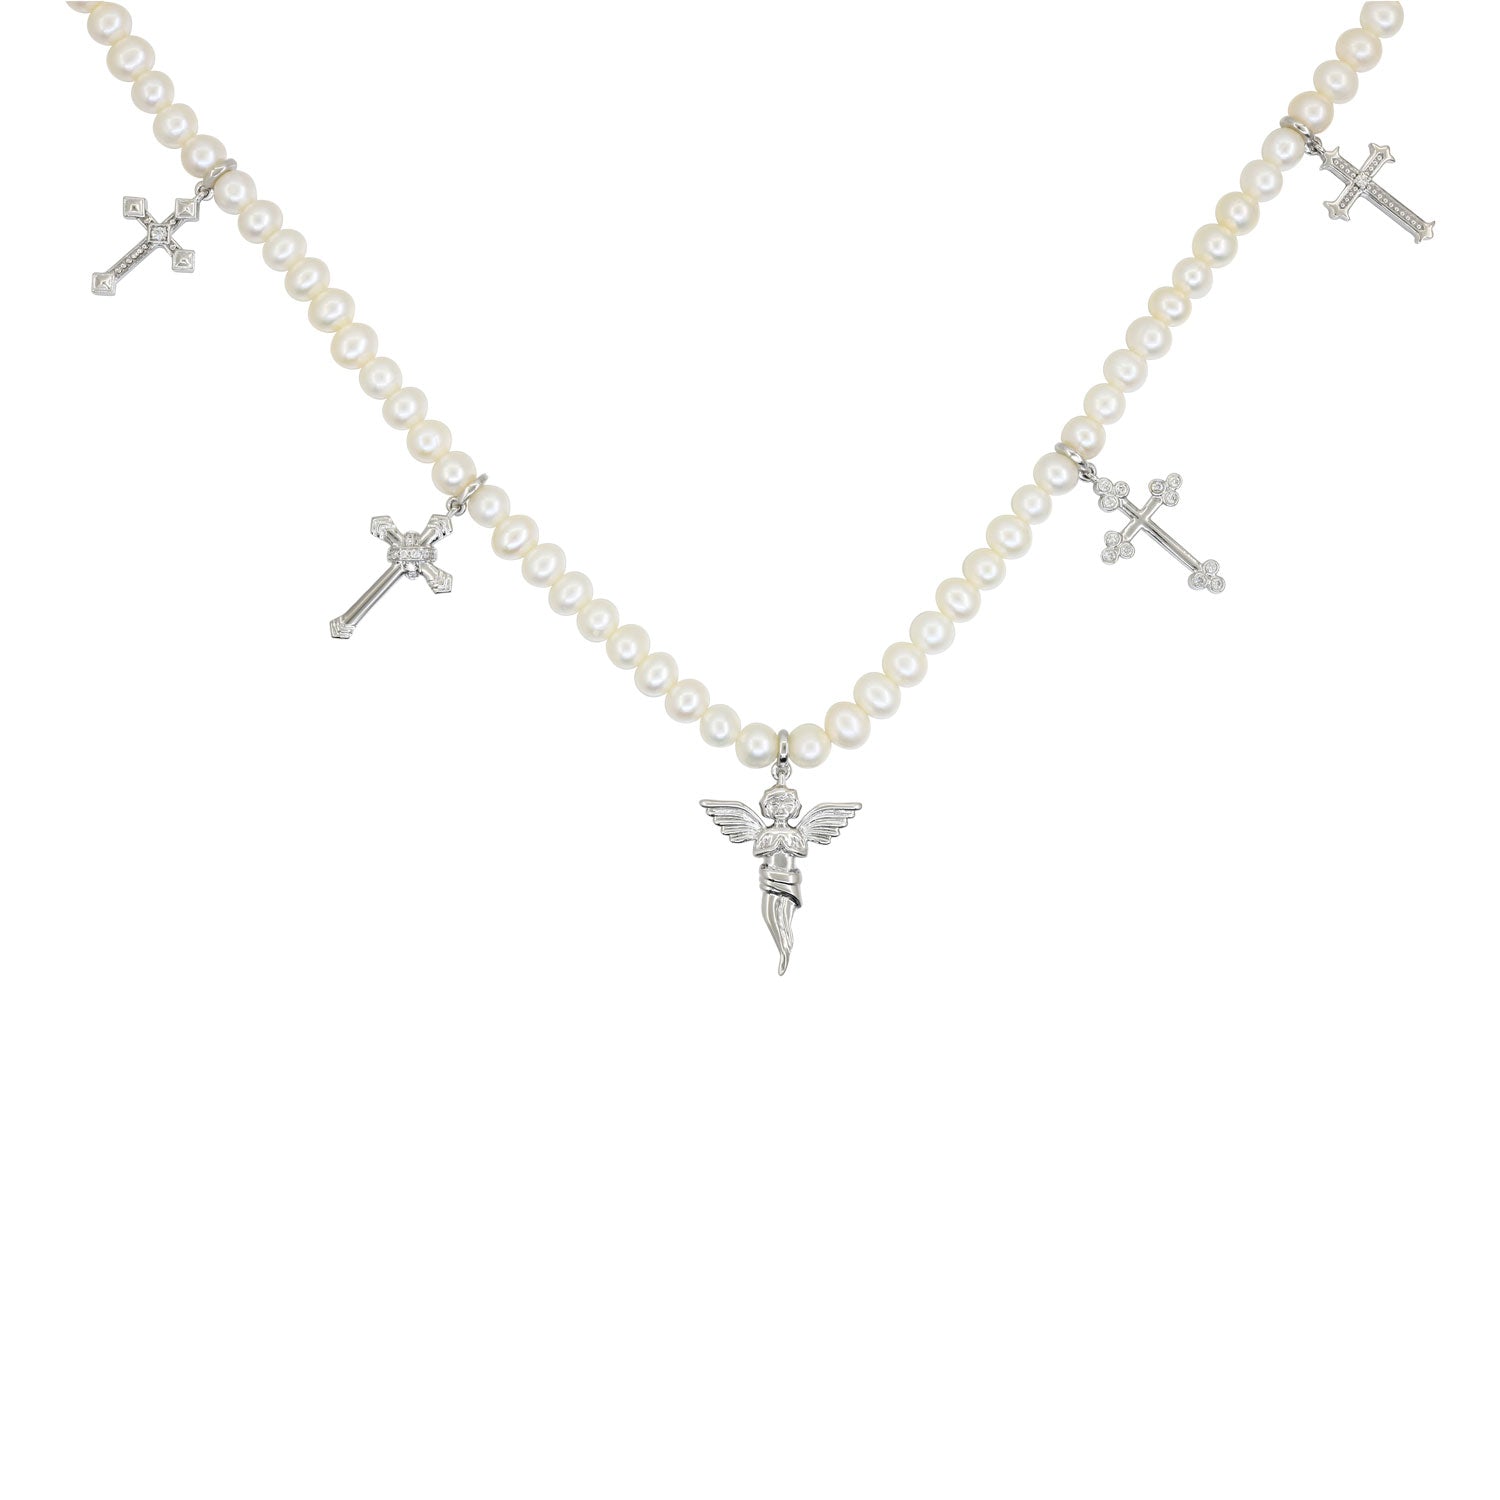 pearl_fifth_crussex_necklace_14k_white_gold_2